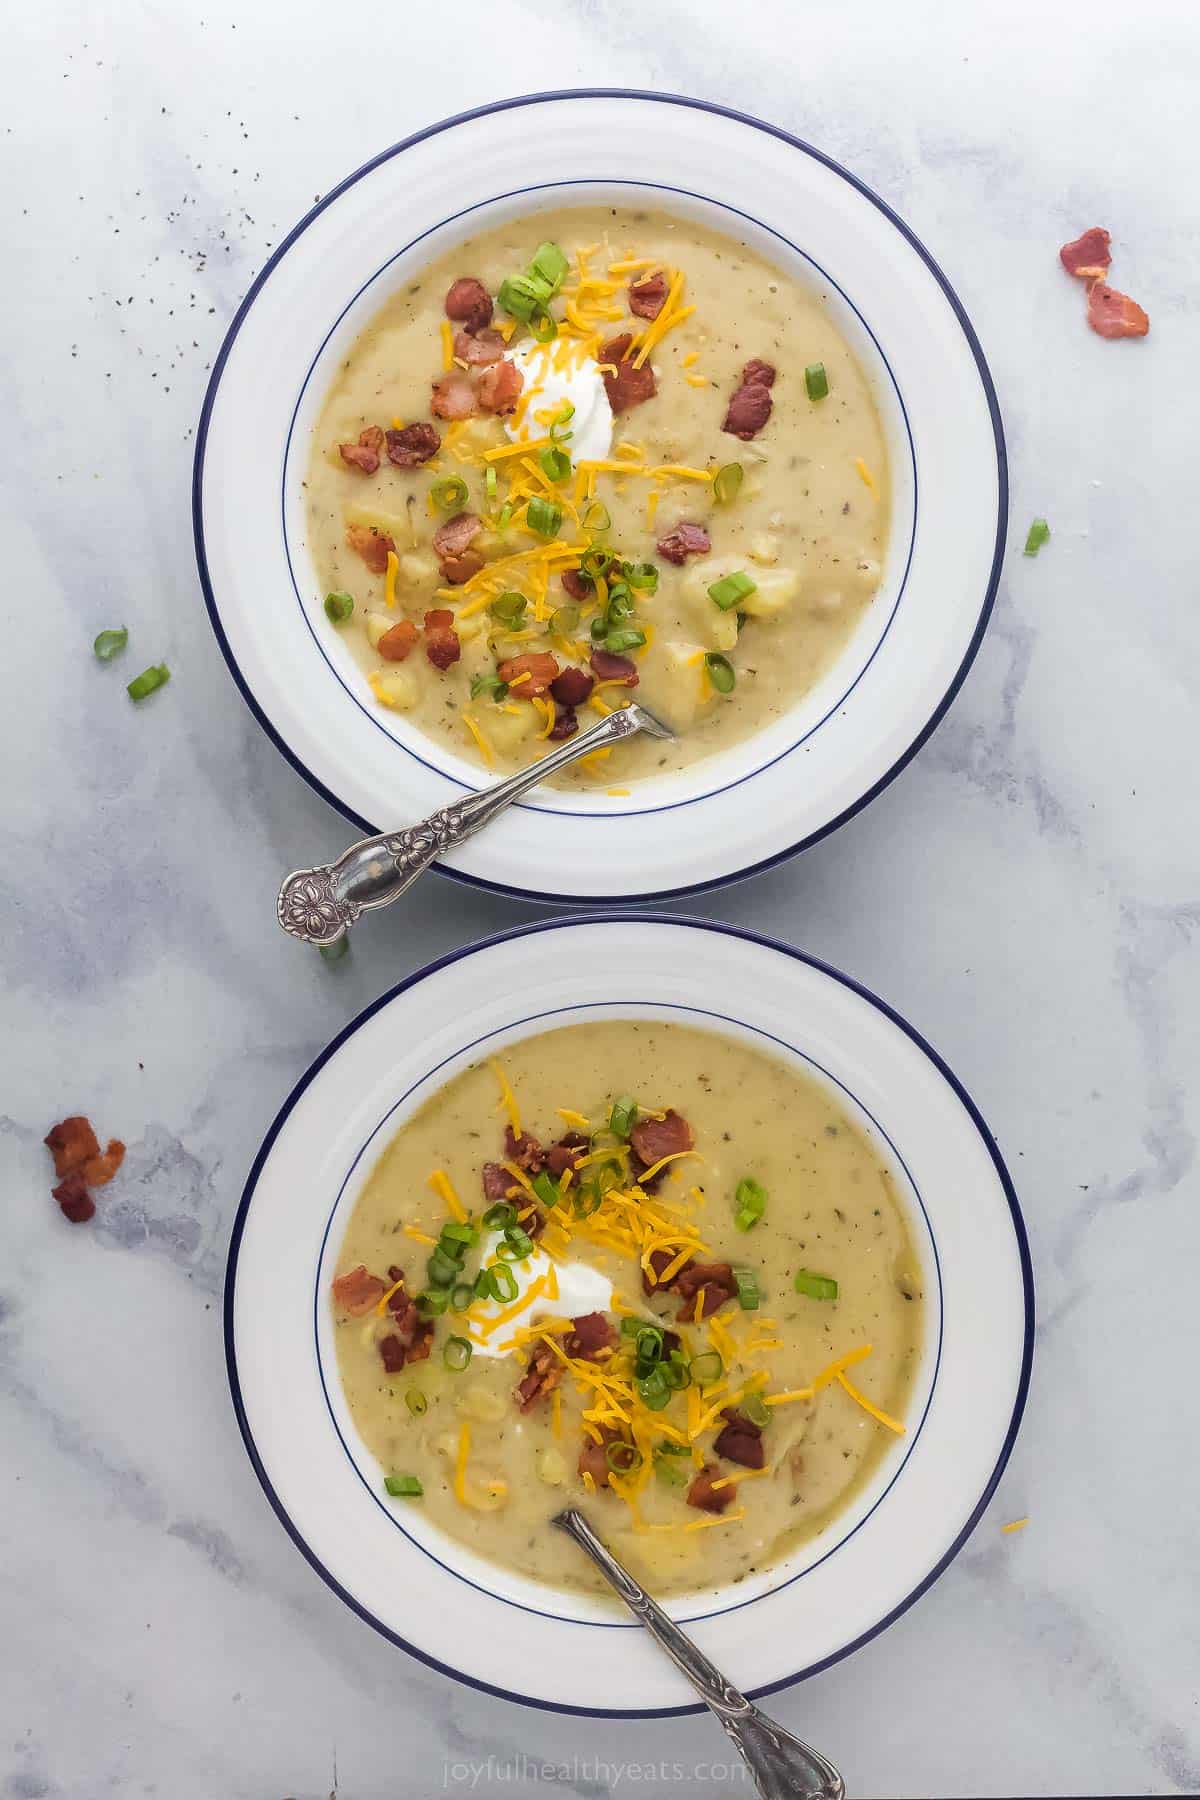 two bowls of a bowl of creamy potato soup with bacon and cheese garnish